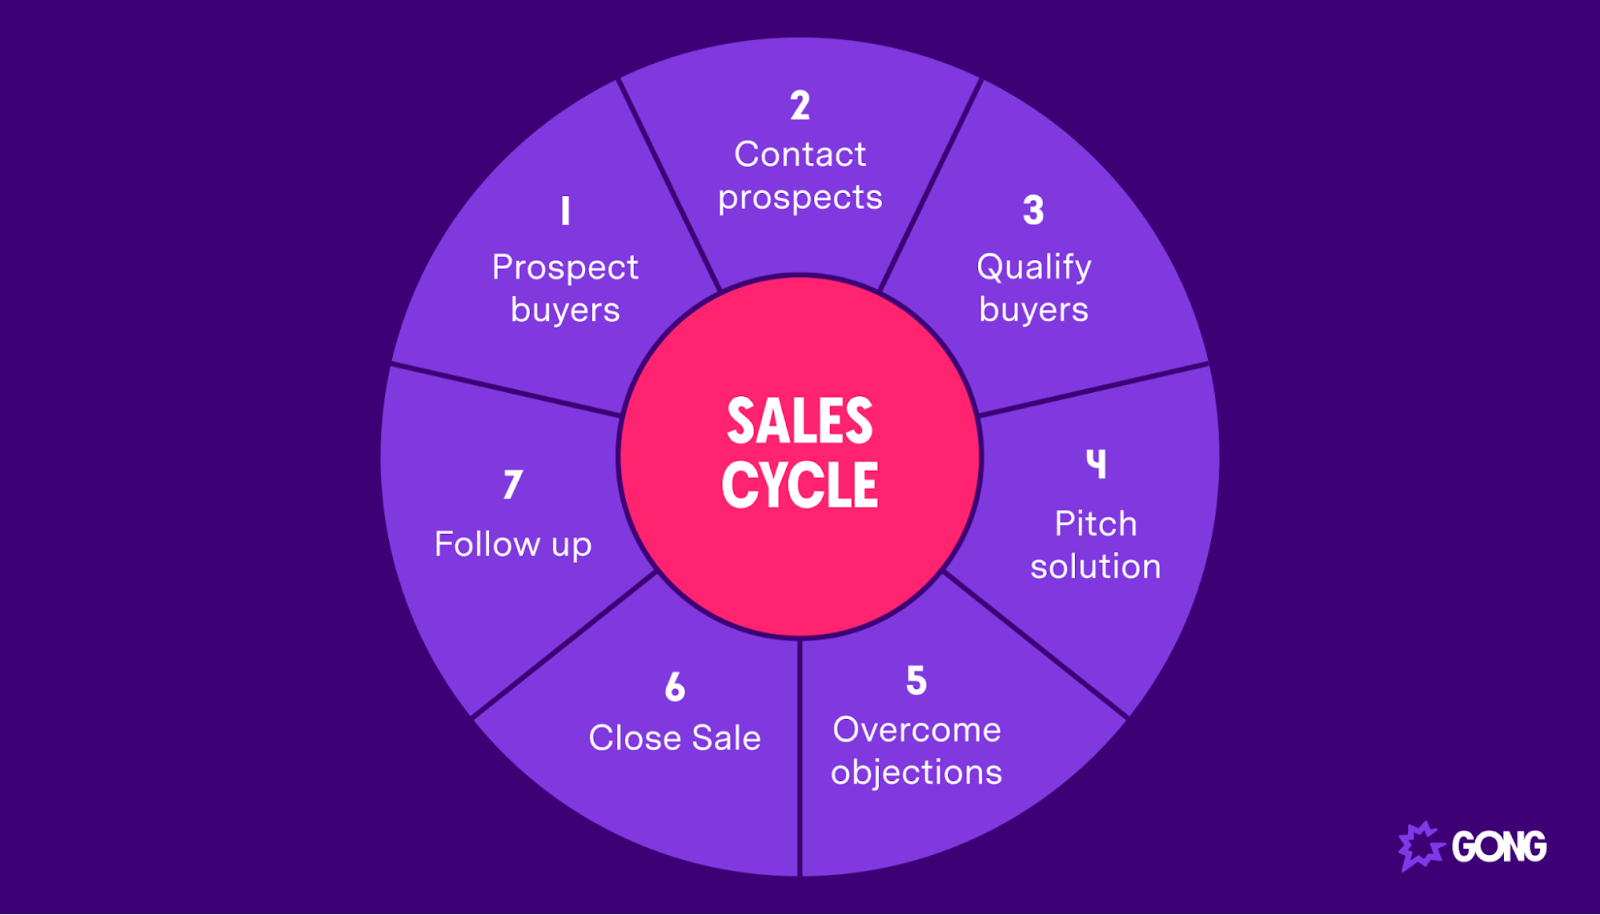 The 7 stages of the sales cycle